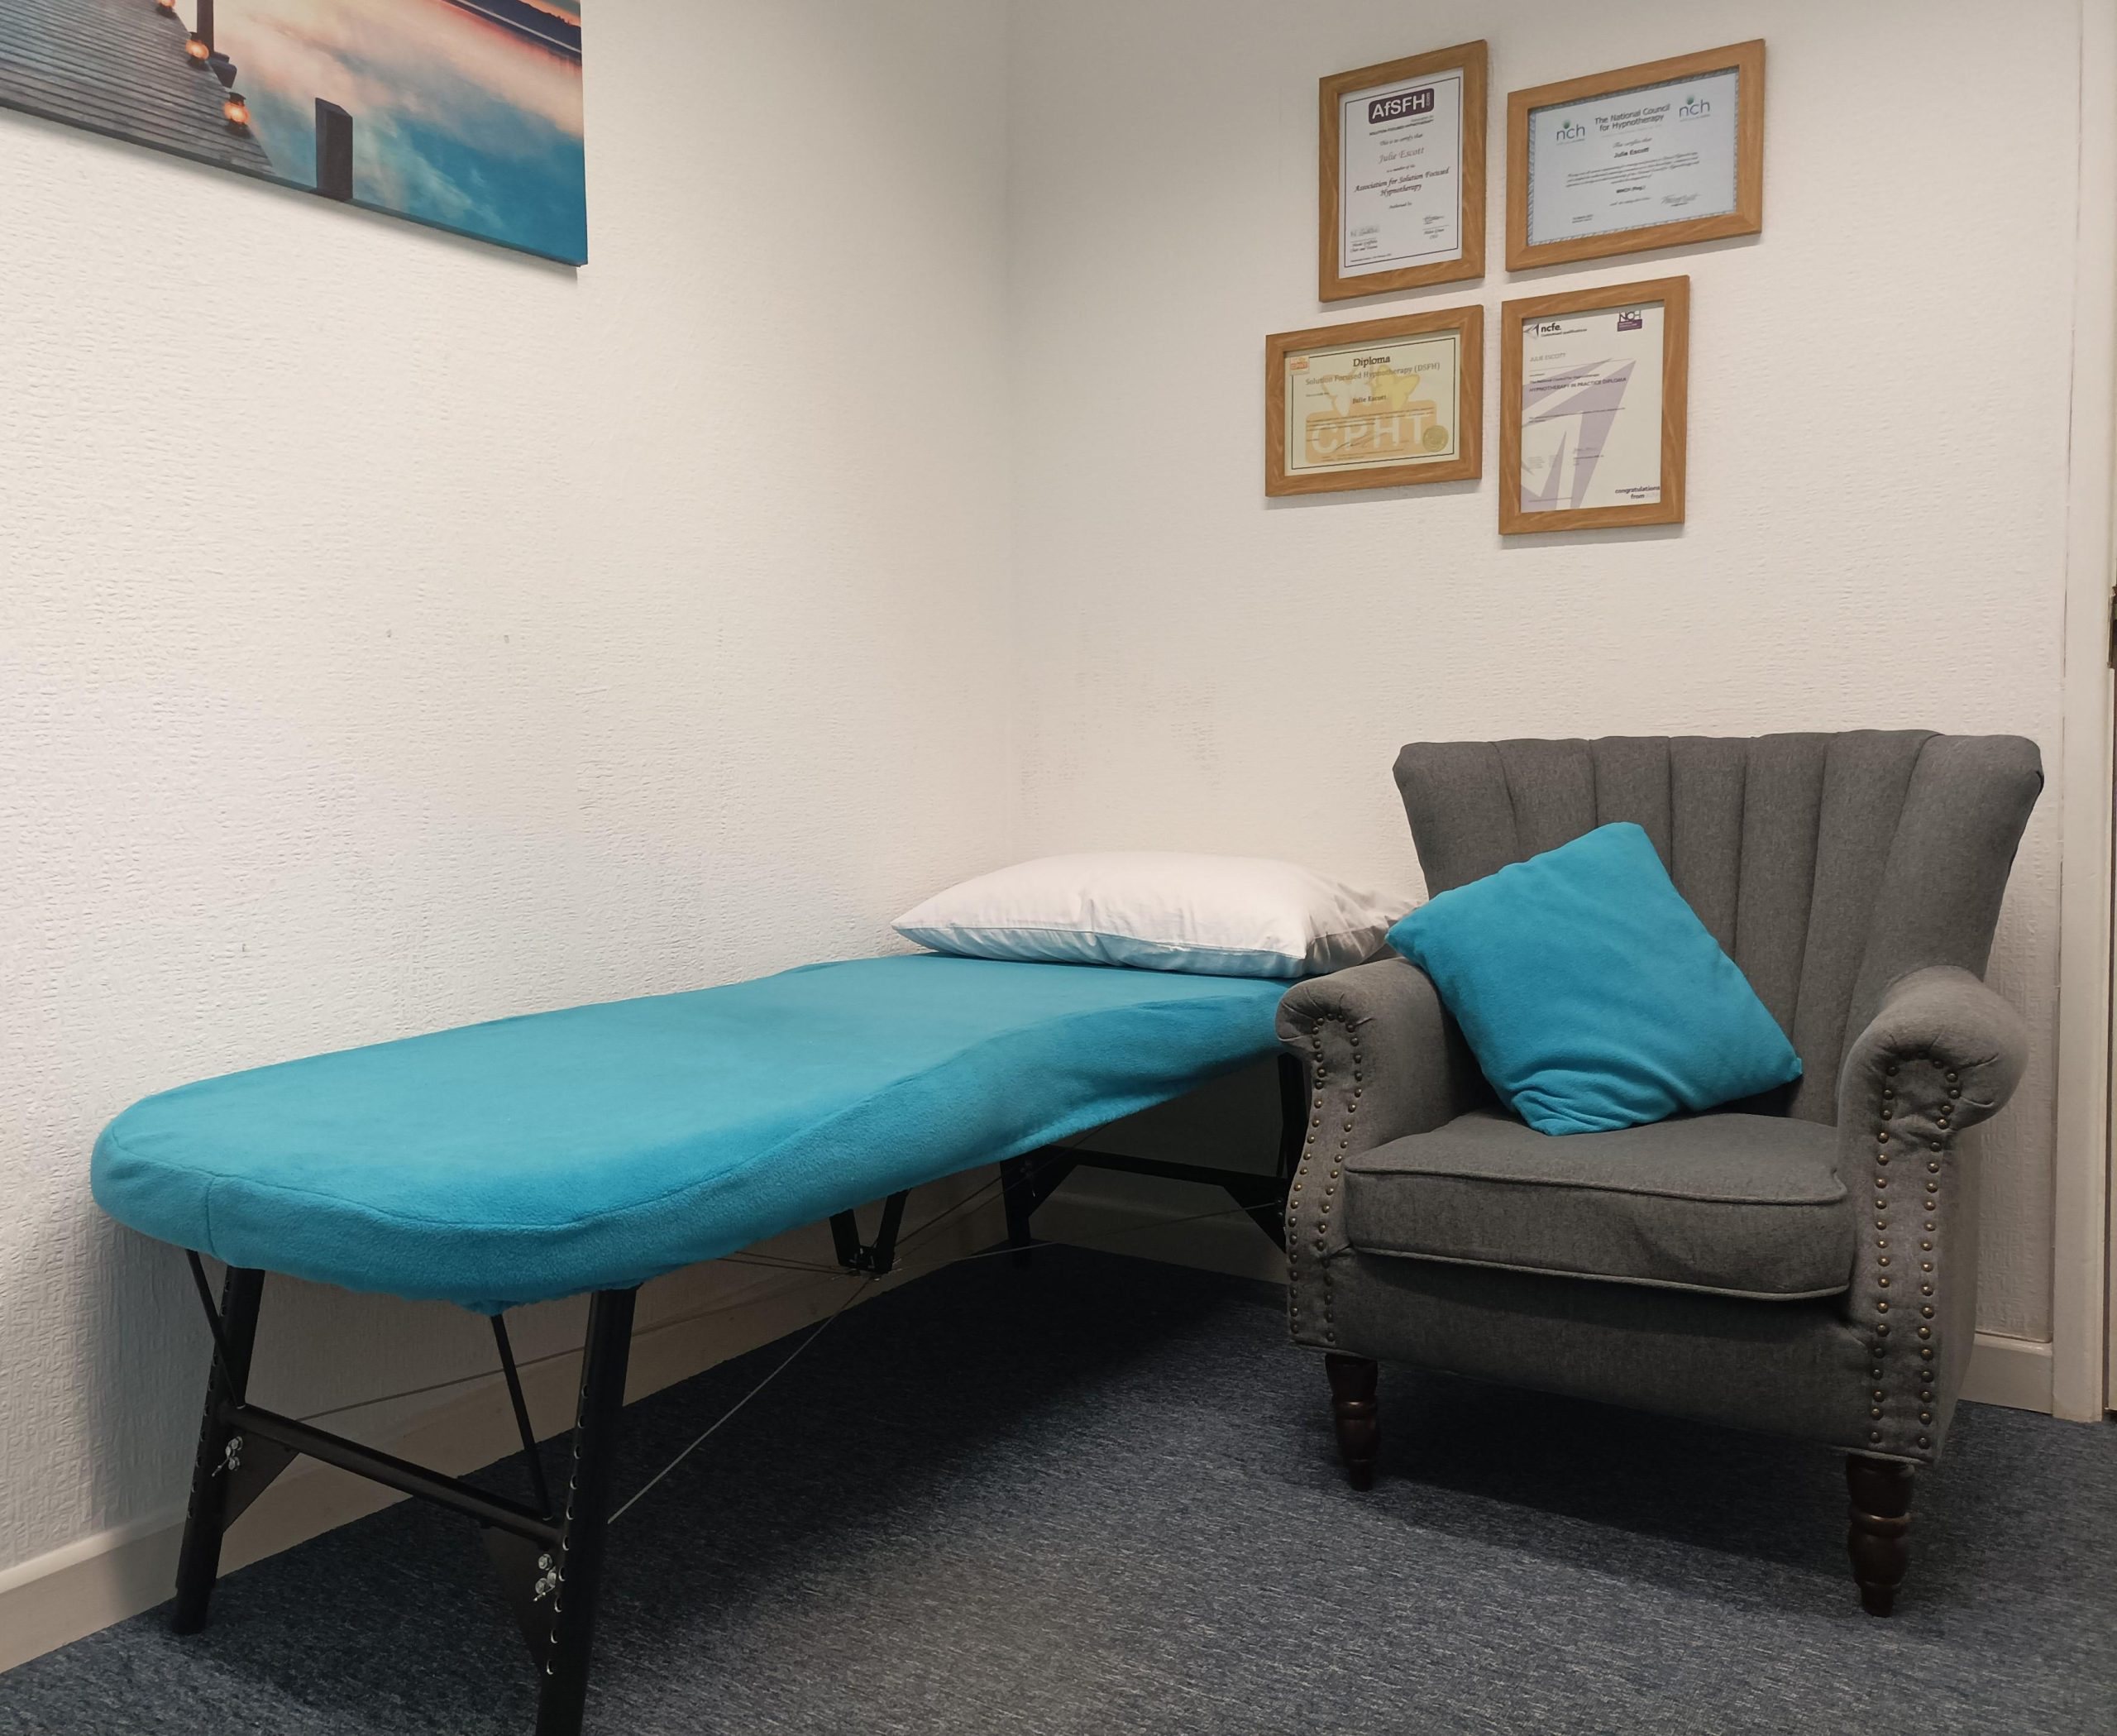 st austell hypnotherapy